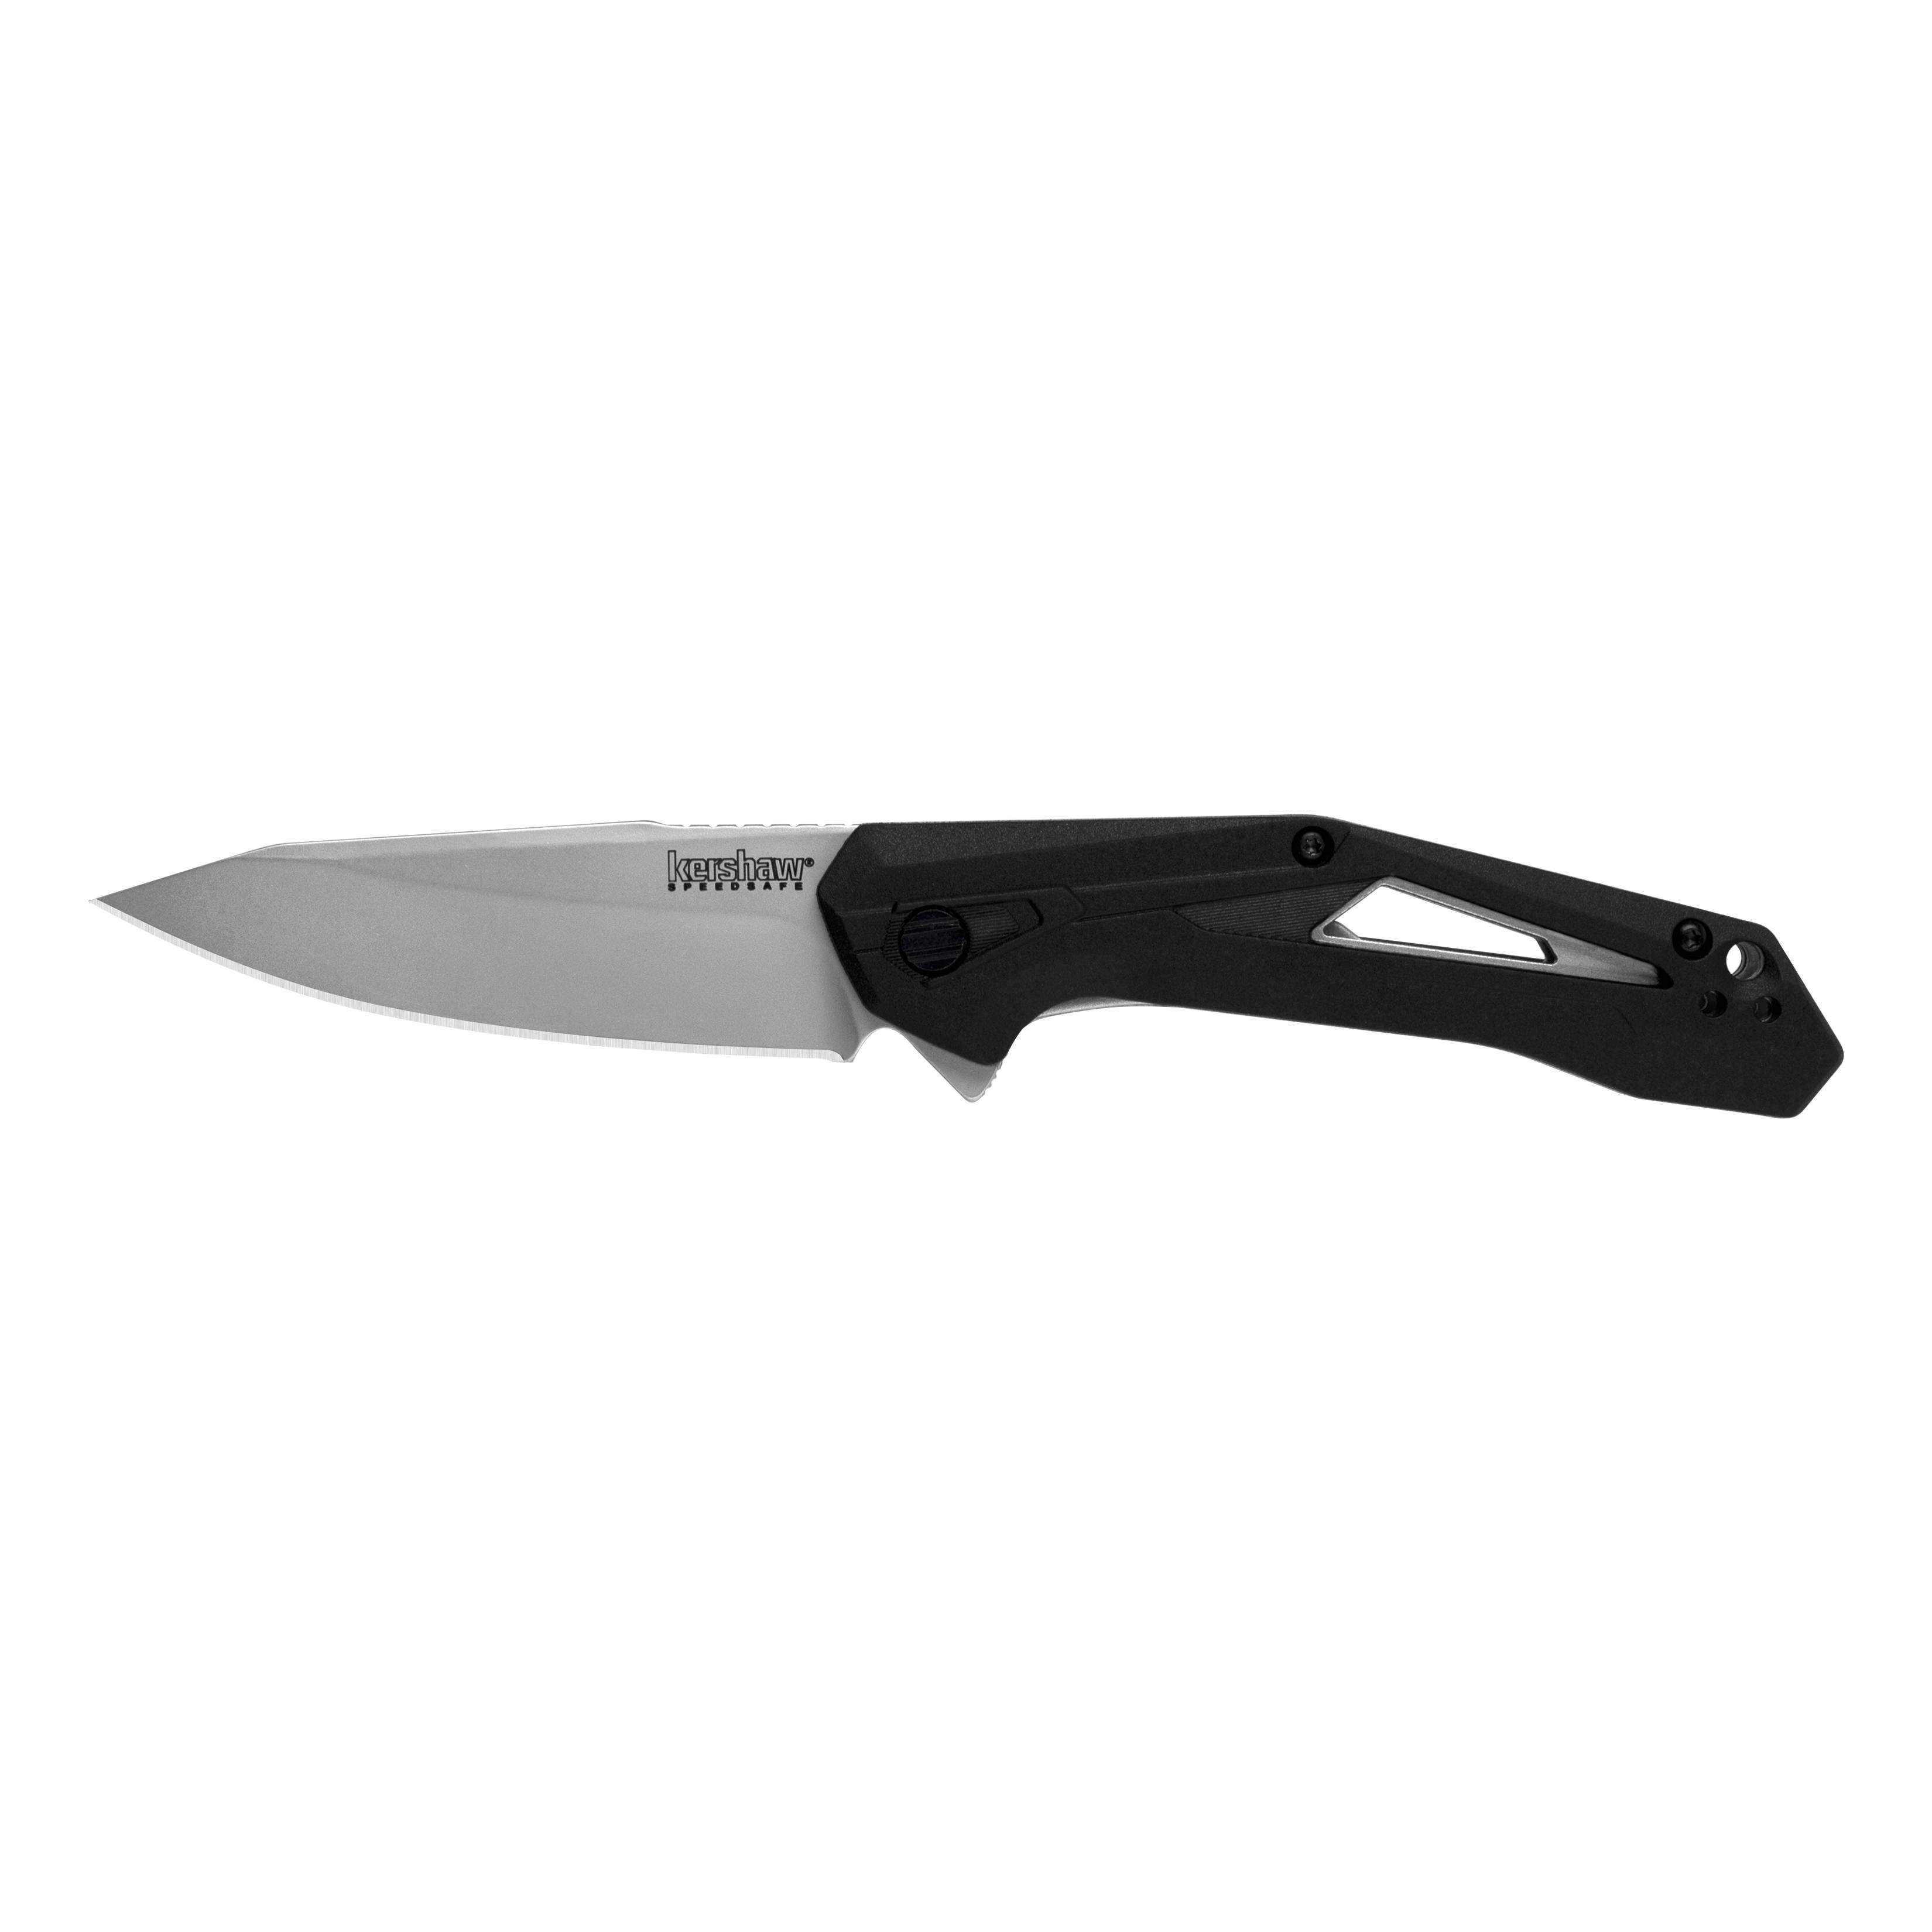 Kershaw® Airlock 1385 3" Assisted Open Knife